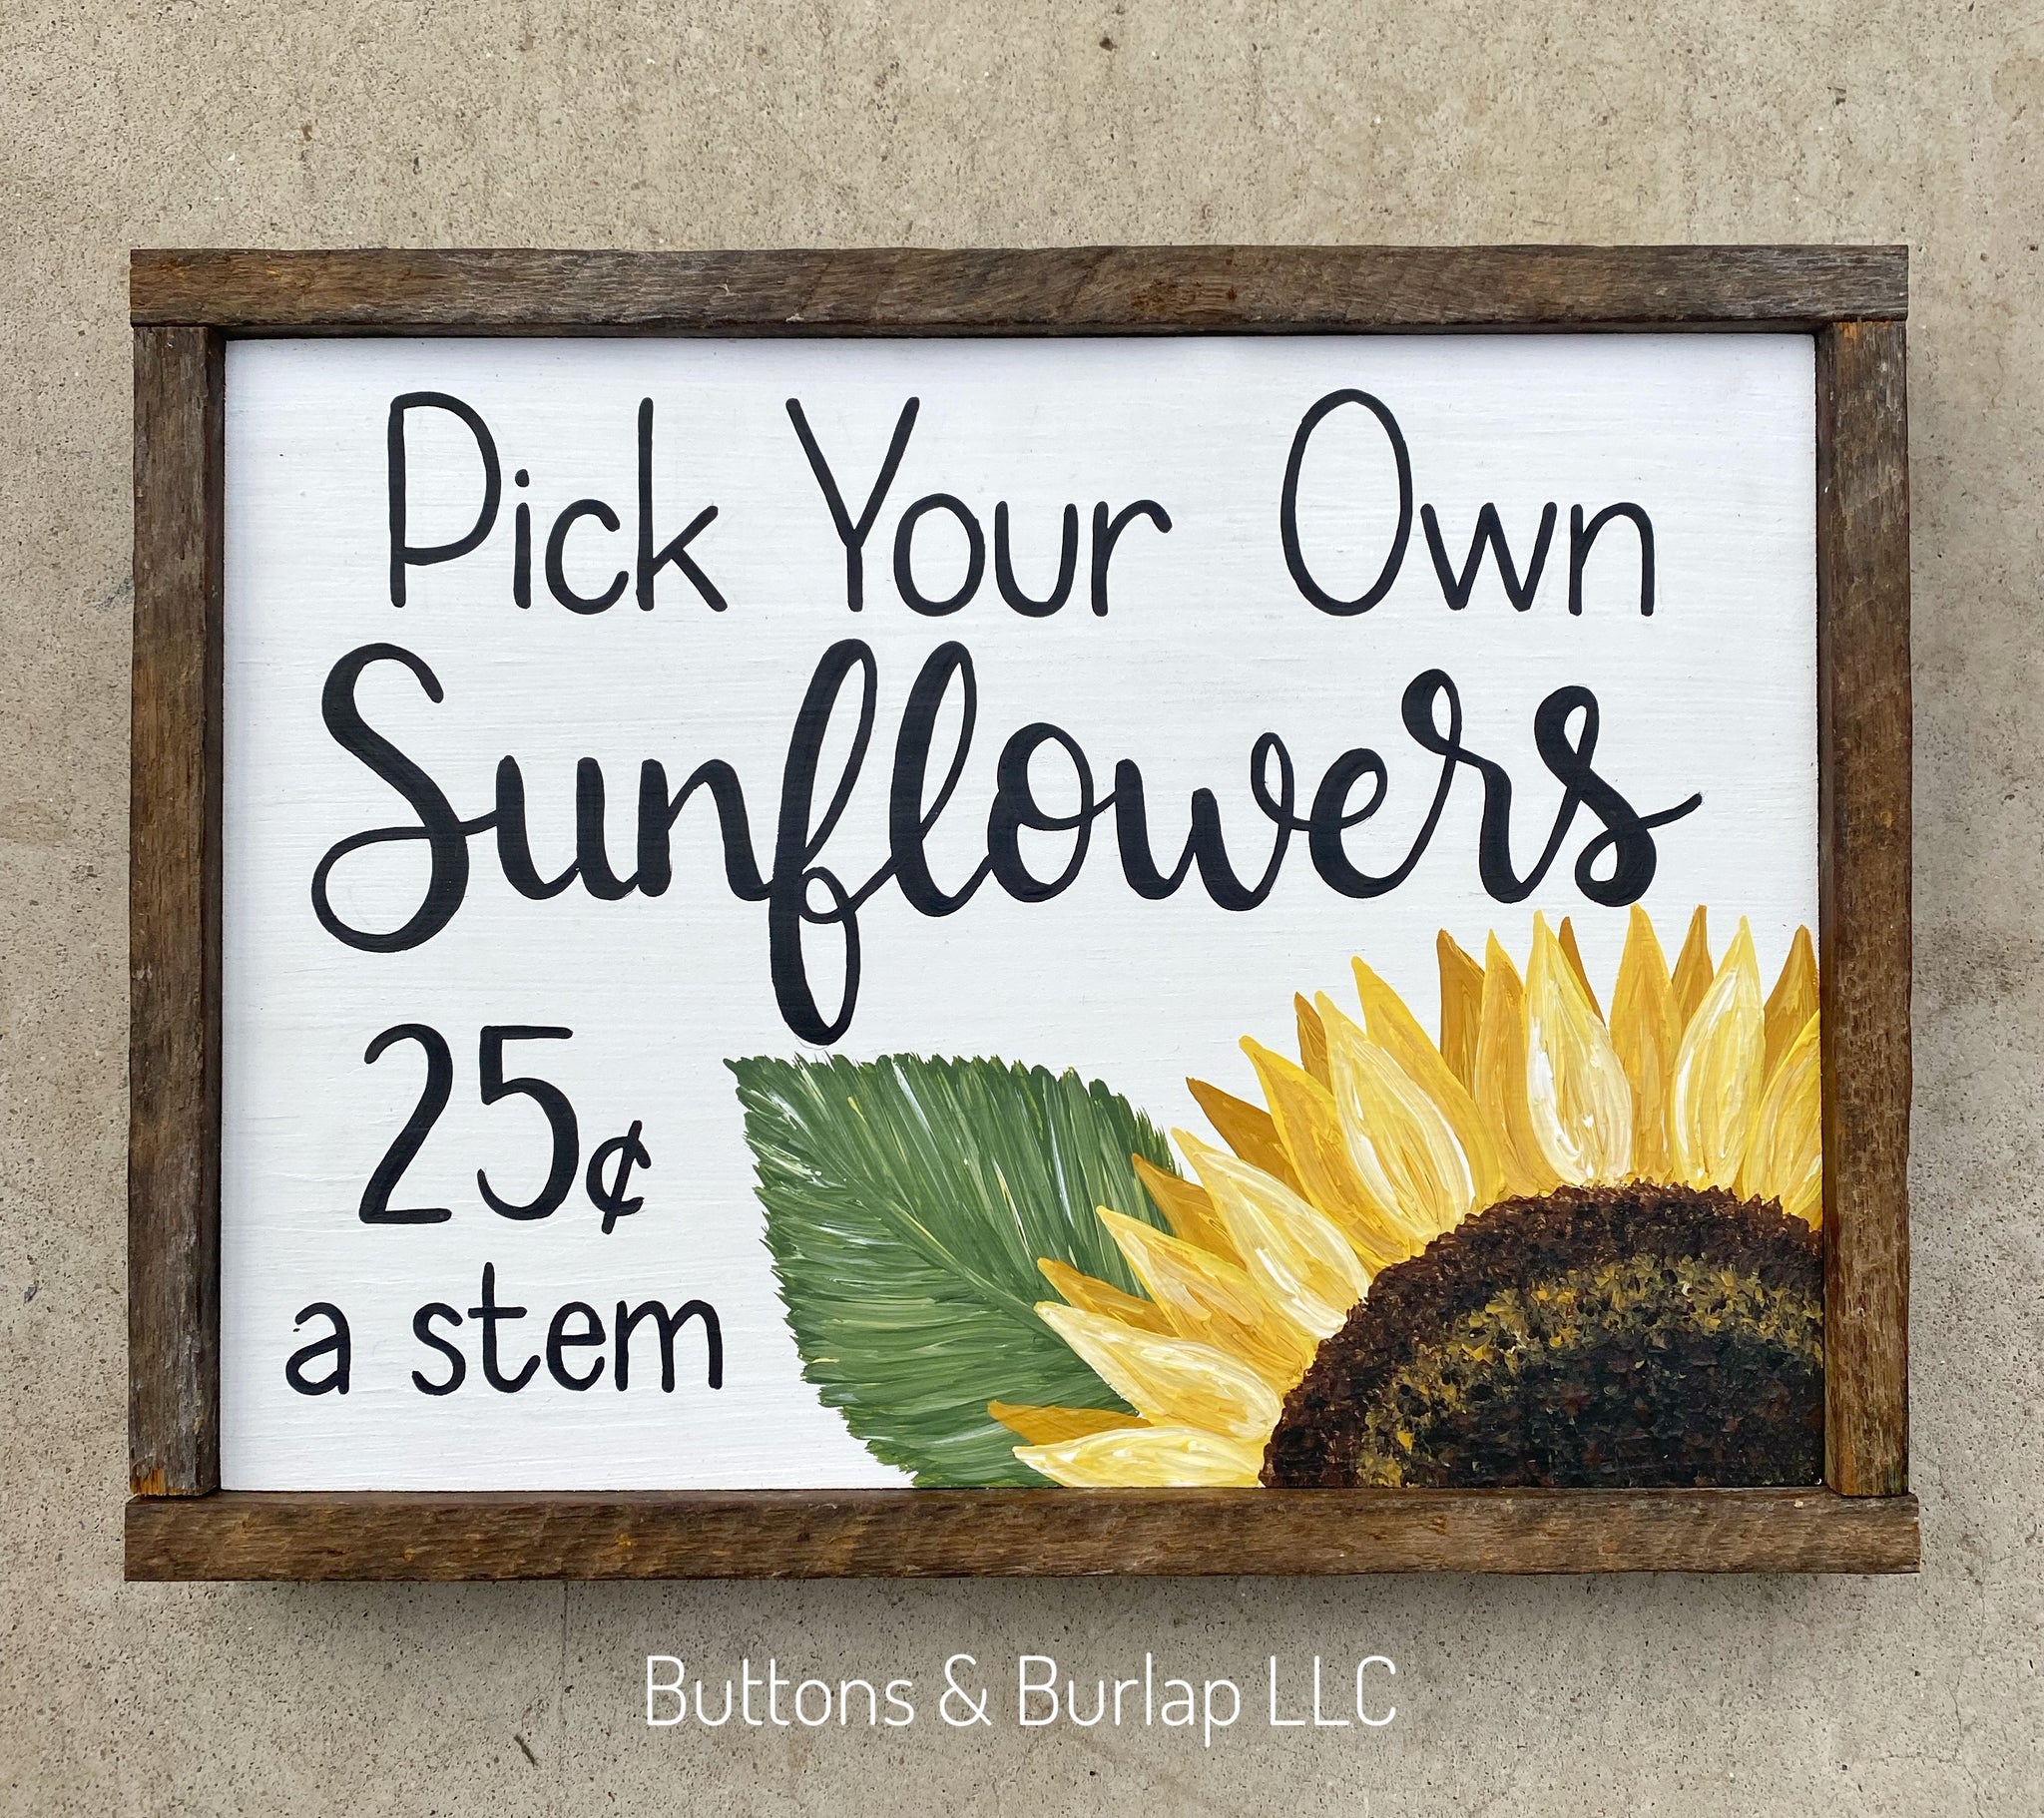 Pick Your Own Sunflowers